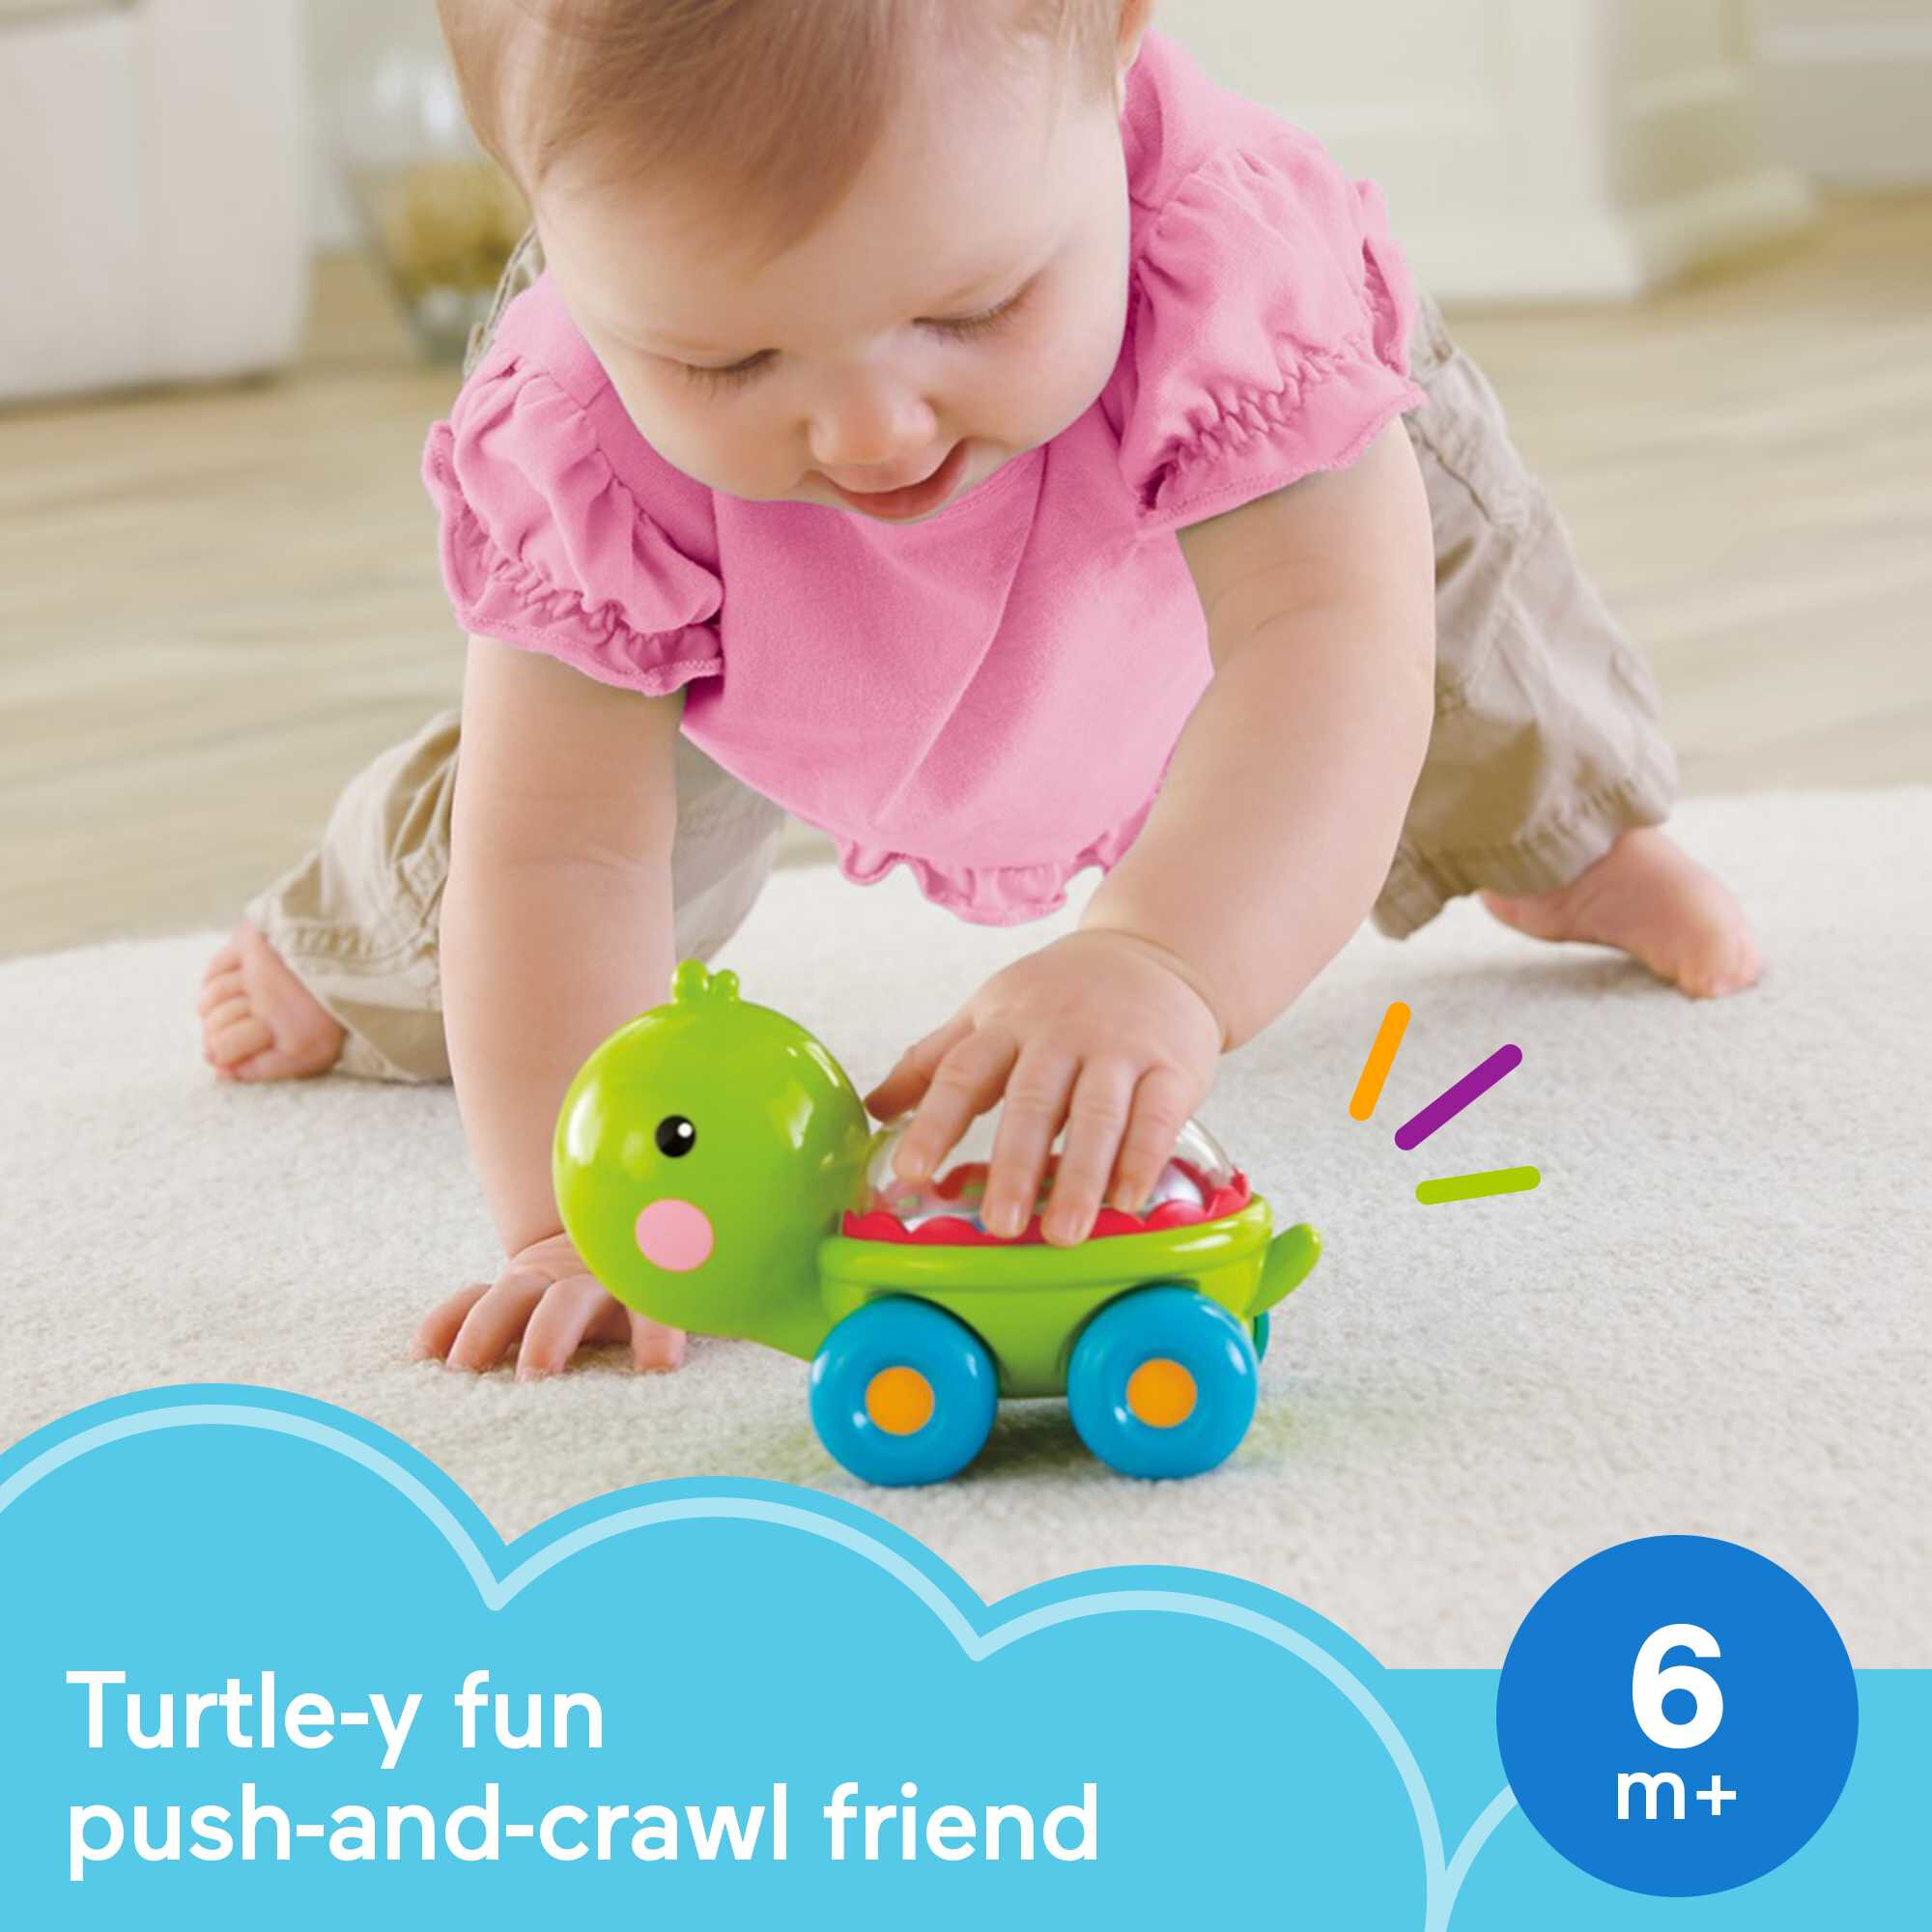 Fisher-Price Poppity Pop Turtle Push-Along Vehicle with Sounds for Infant Crawling Play - image 2 of 6